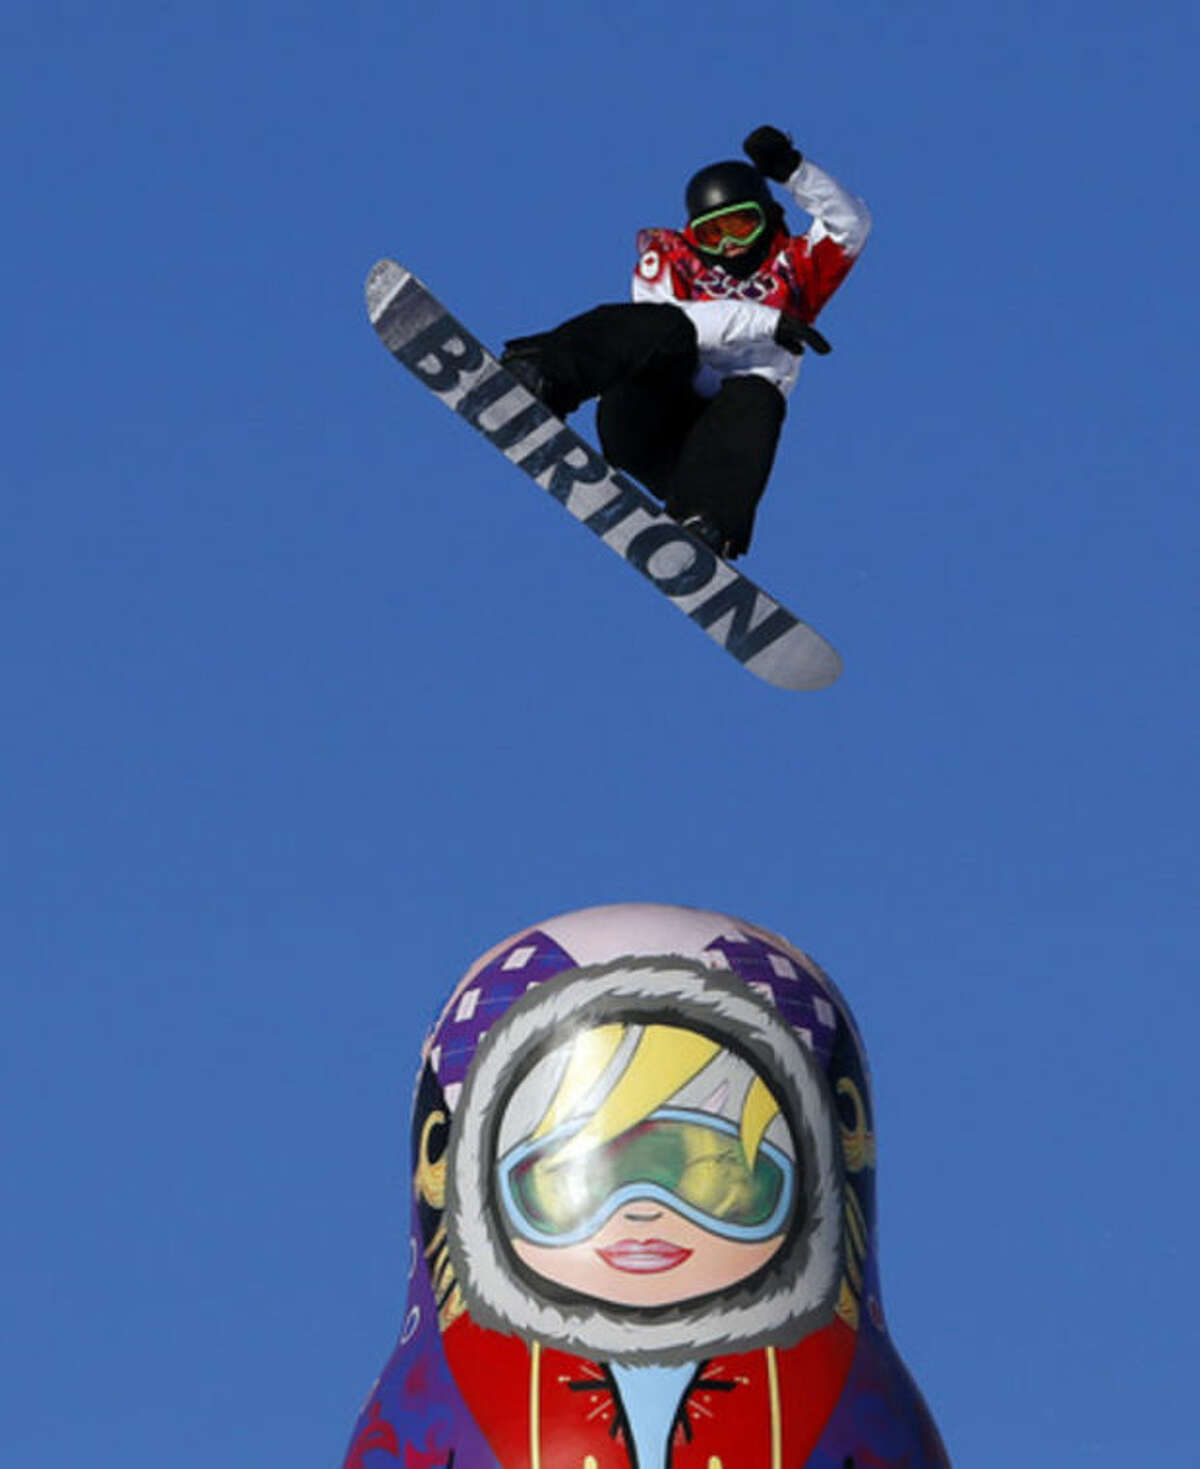 Canada's Mark McMorris takes a jump during the men's snowboard slopestyle semifinal at the Rosa Khutor Extreme Park, at the 2014 Winter Olympics, Saturday, Feb. 8, 2014, in Krasnaya Polyana, Russia. (AP Photo/Sergei Grits)